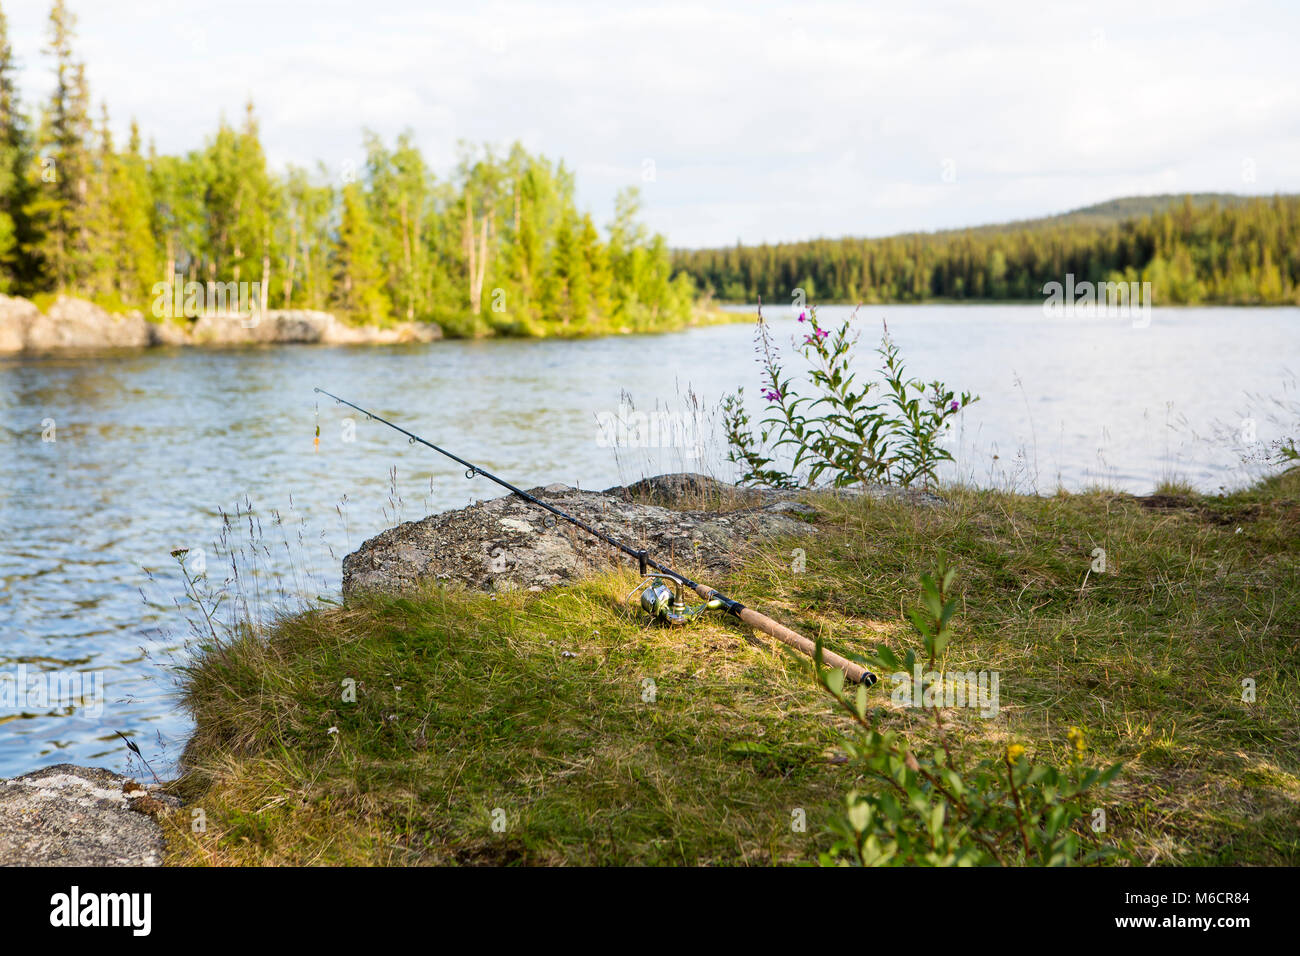 Fishermans fishing rod and reel placed on the ground by the water. A wild untouched nature is in the background. Stock Photo